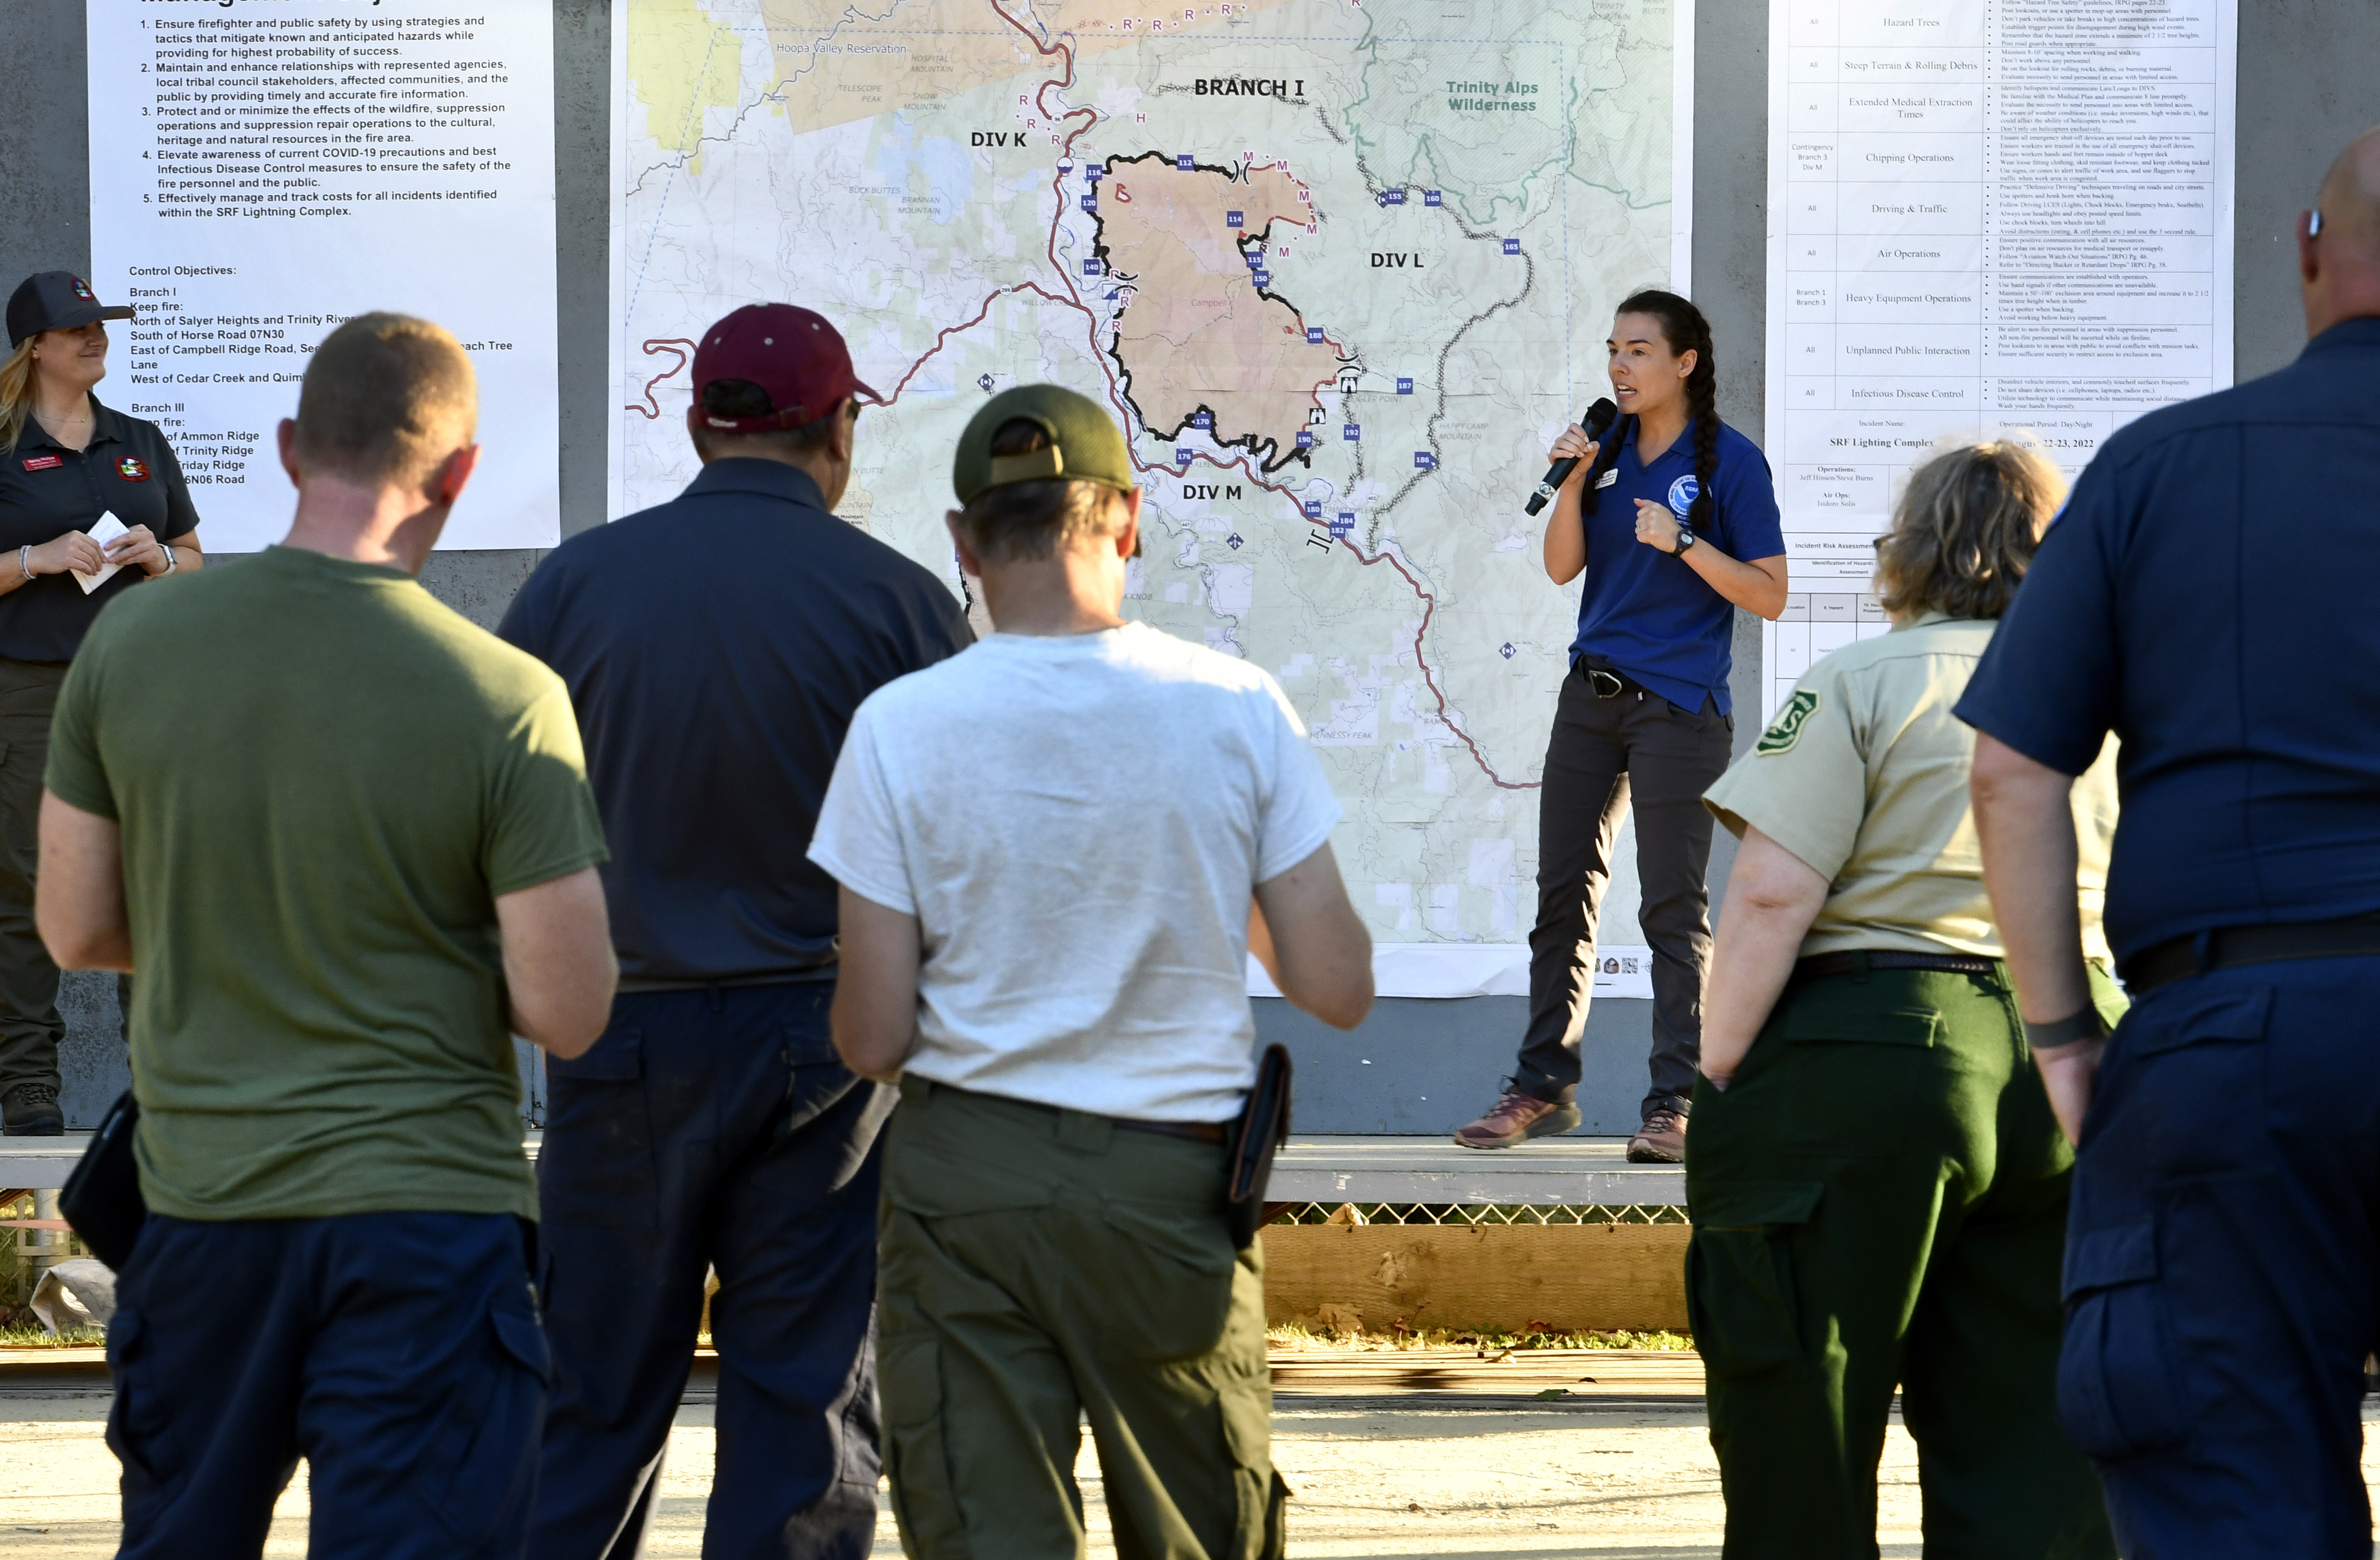 IMET trainee Rebecca Muessle provides an update on weather conditions to fire crews at Six Rivers Lightning Fire in Northern California on August 23, 2022. 